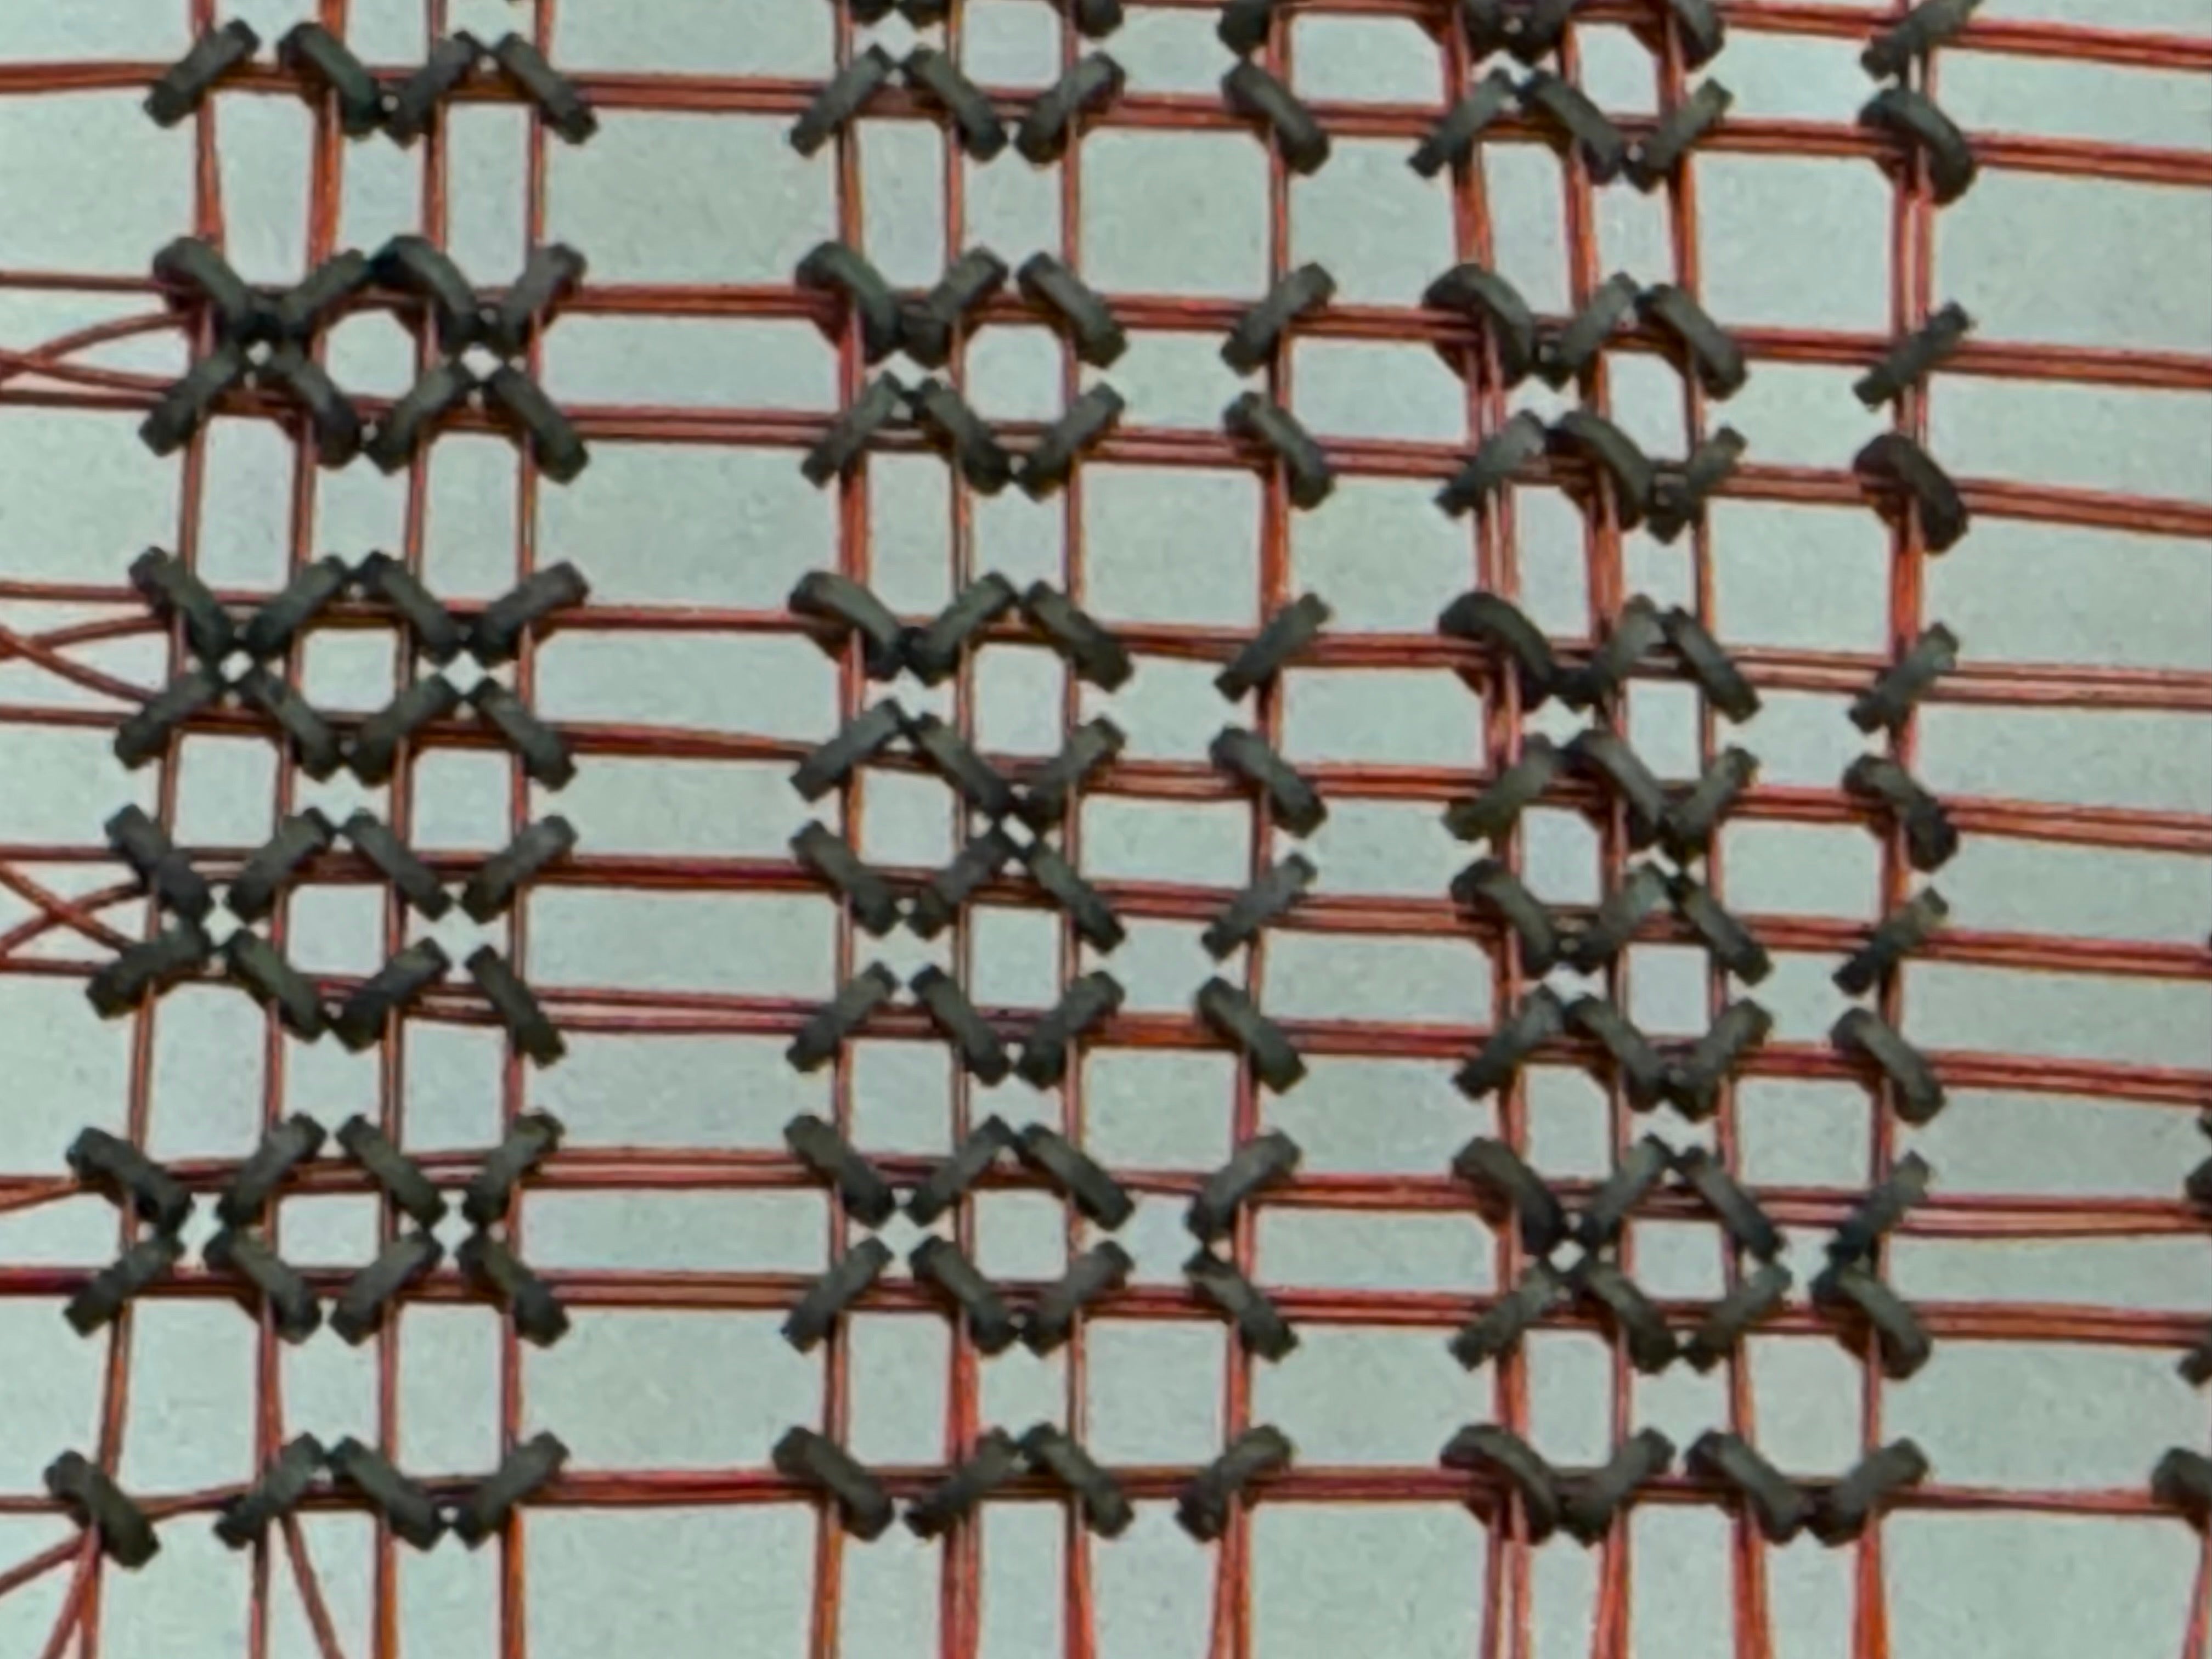 Close image of a core memory board with torroids visible 